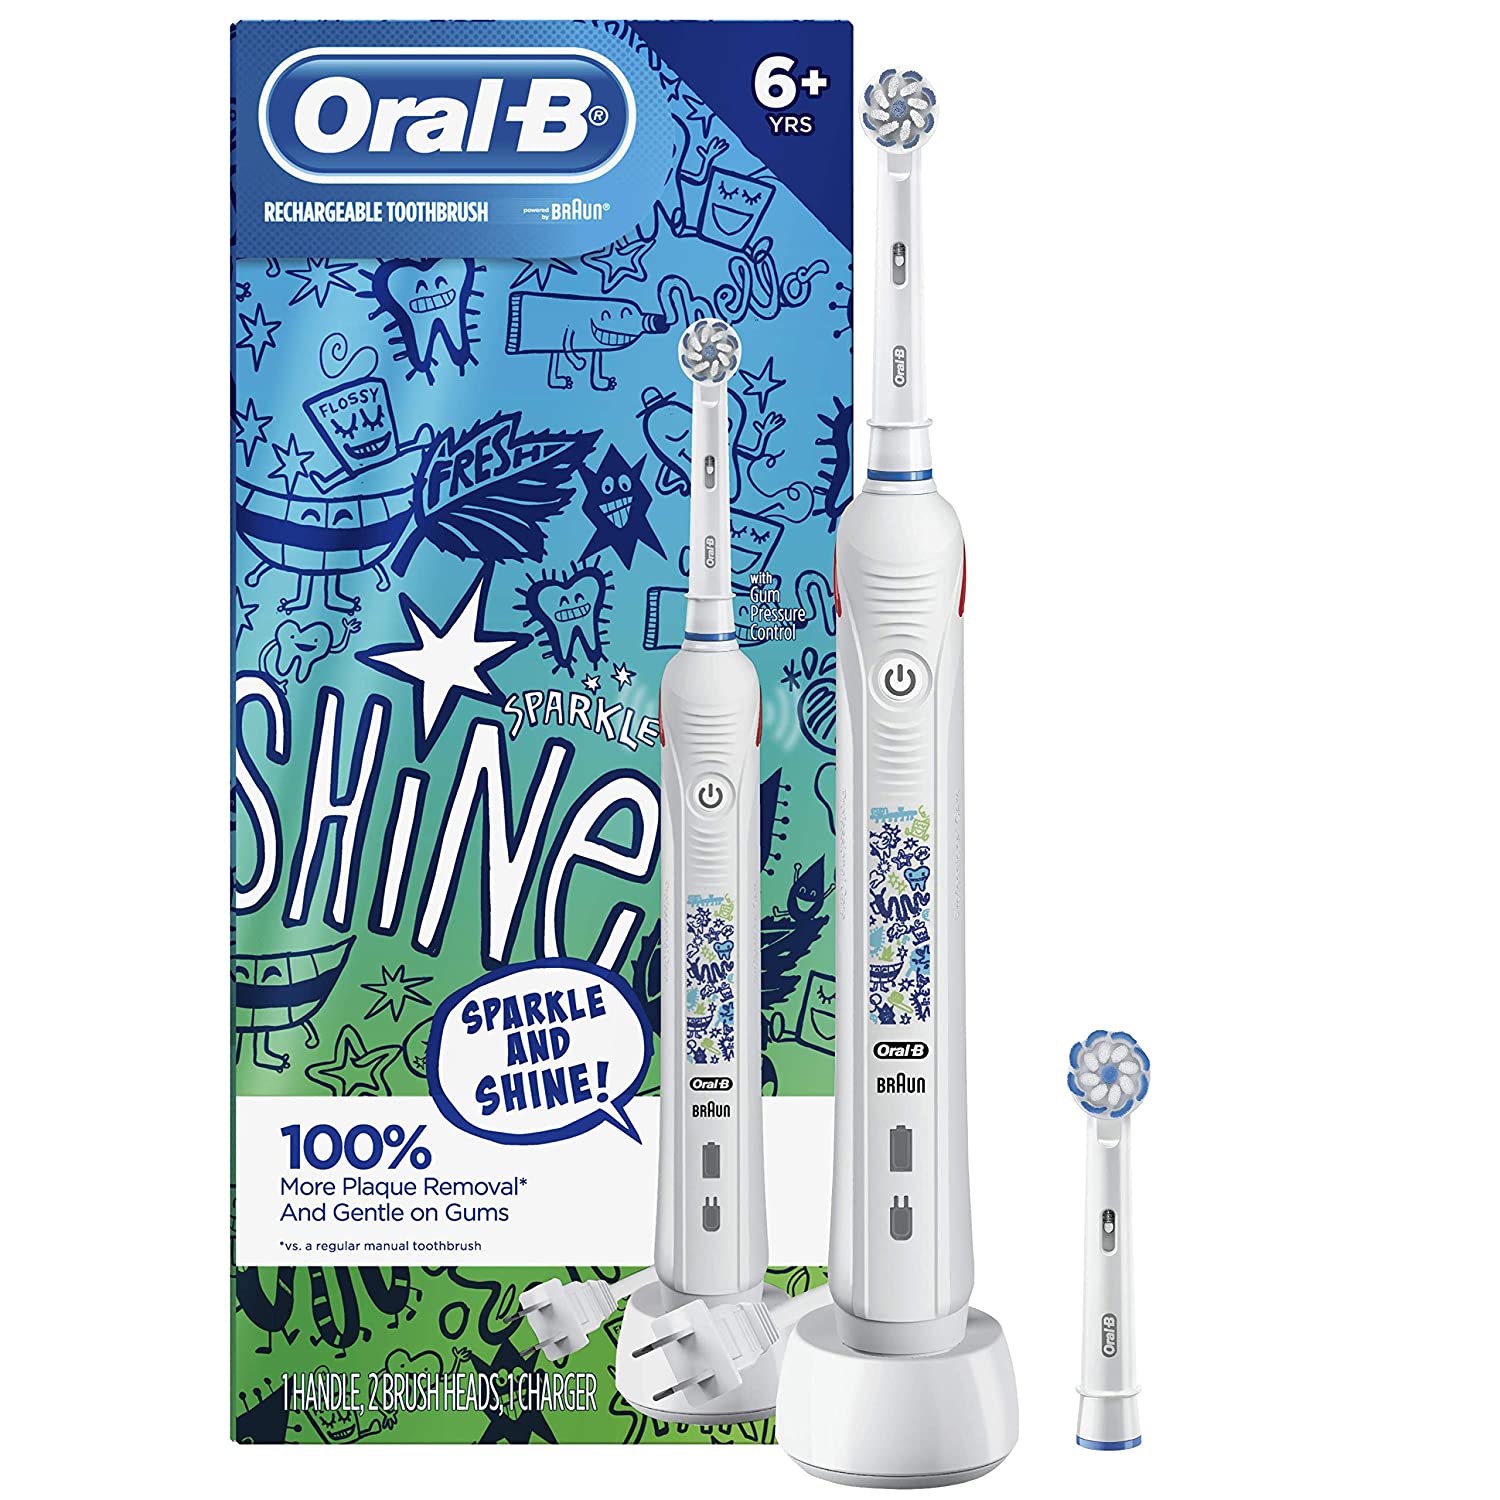 Kids Oral B Electric Toothbrush- Amazon Prime Day Deal!